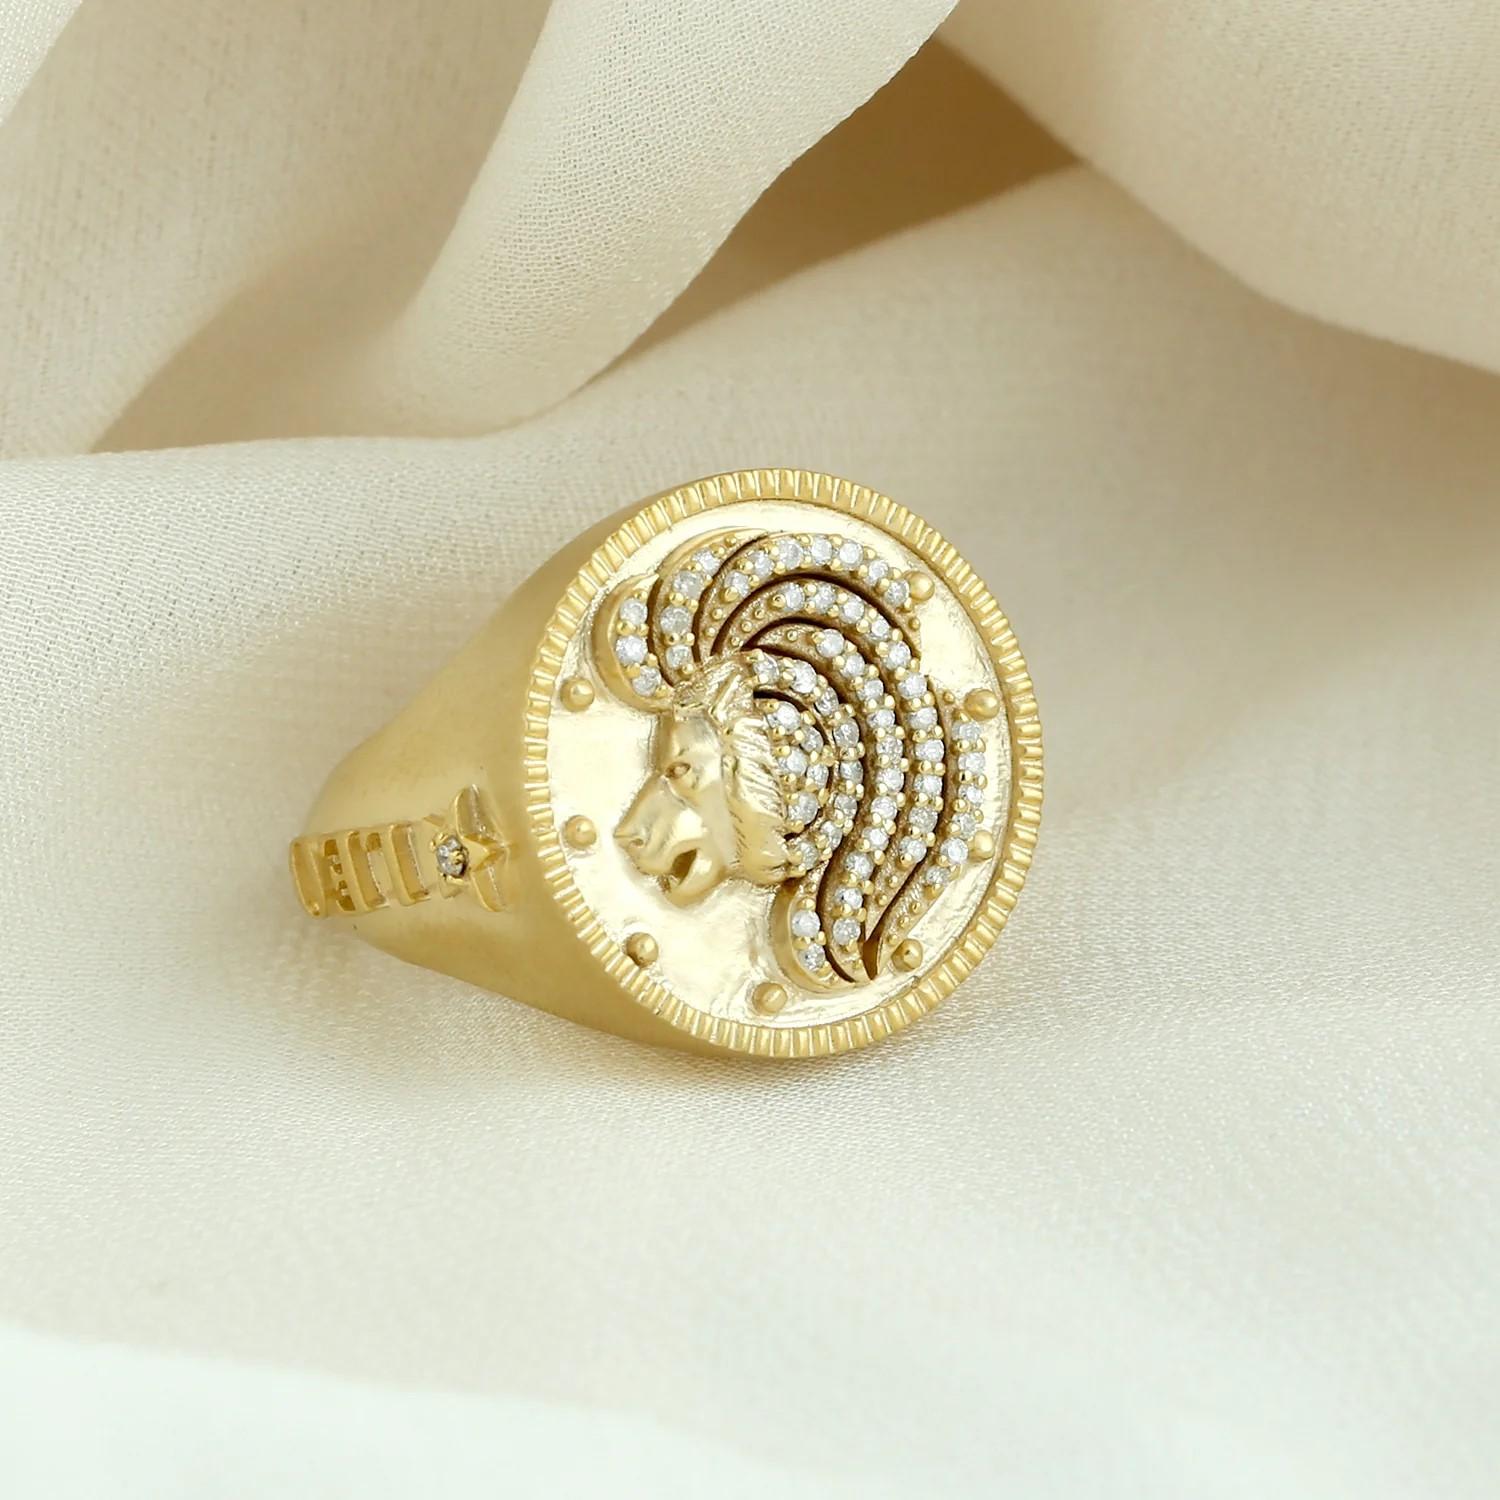 This ring has been meticulously crafted from 14-karat gold and set with .28 carats of sparkling diamonds.  See other Zodiac collection ring and pendants.

The ring is a size 7 and may be resized to larger or smaller upon request. 
FOLLOW  MEGHNA